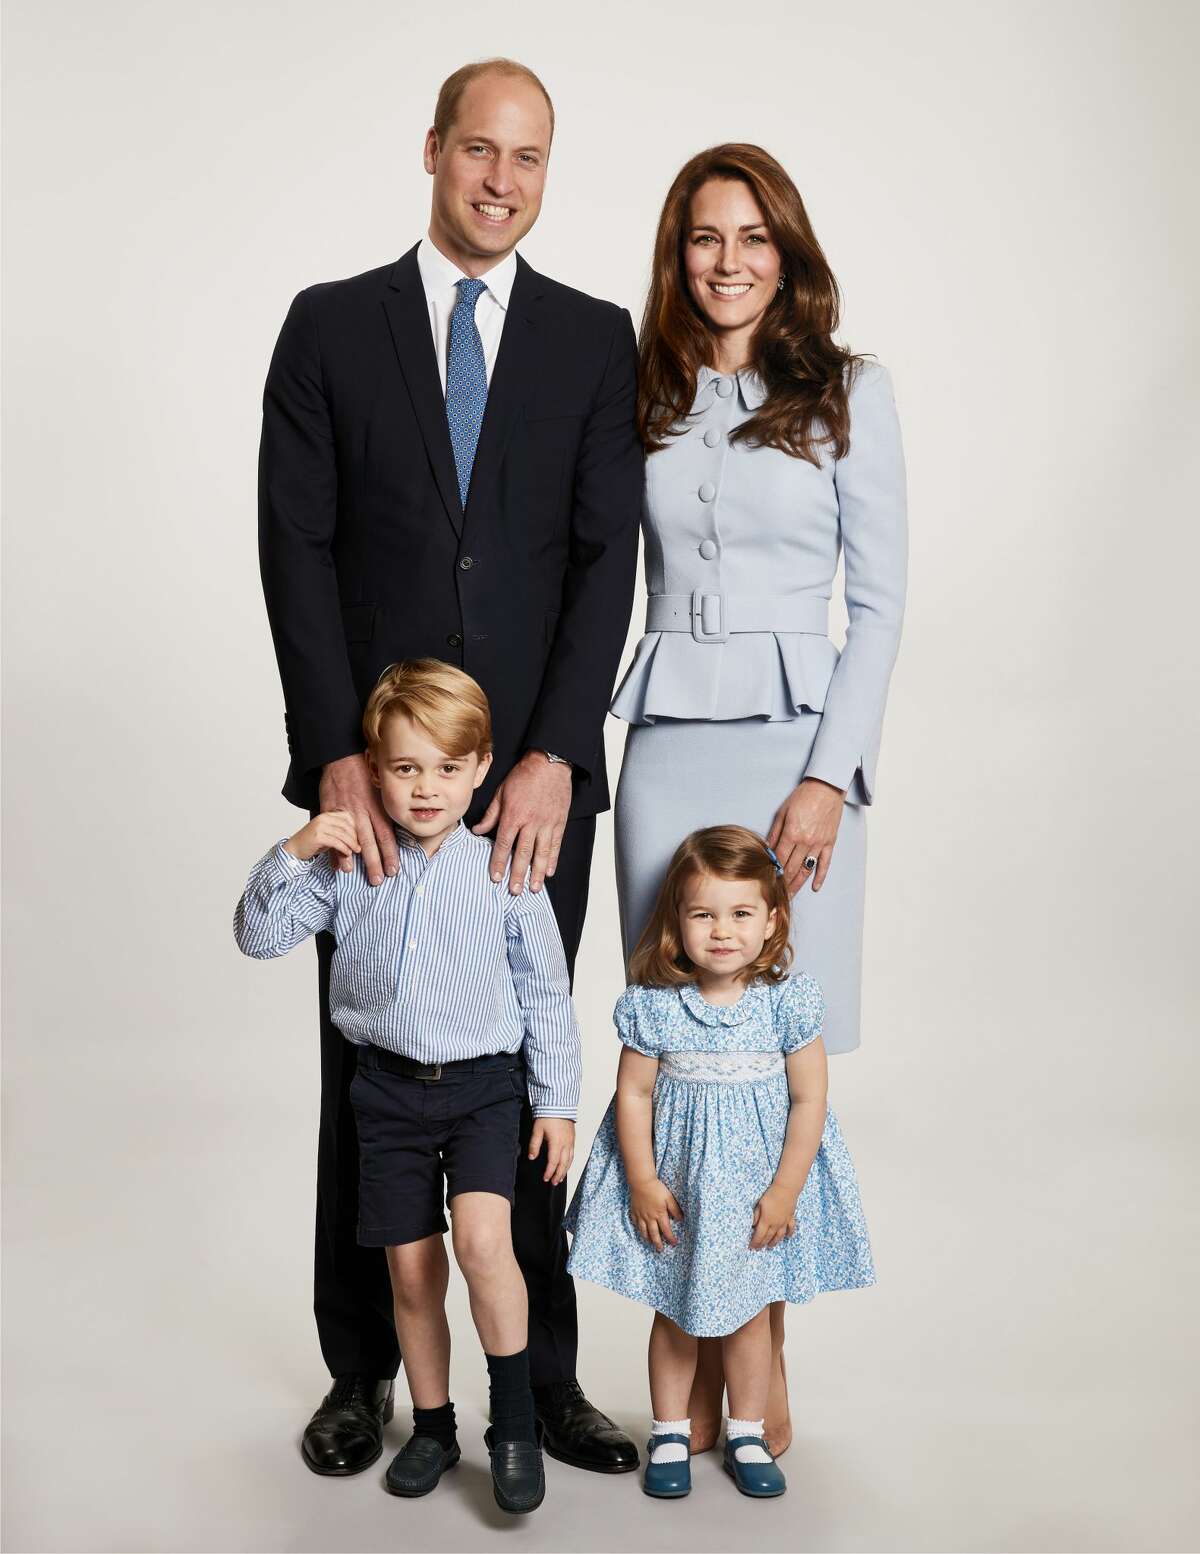 Image shows picture used for the Duke and Duchess of Cambridge's 2017 Christmas card which was taken by Getty Images royal photographer Chris Jackson at Kensington Palace showing the royal couple with their children Prince George and Princess Charlotte, Issued on December 18, 2017, in London, England. Continue through the photos to see the photos of Kate Middleton through the years.